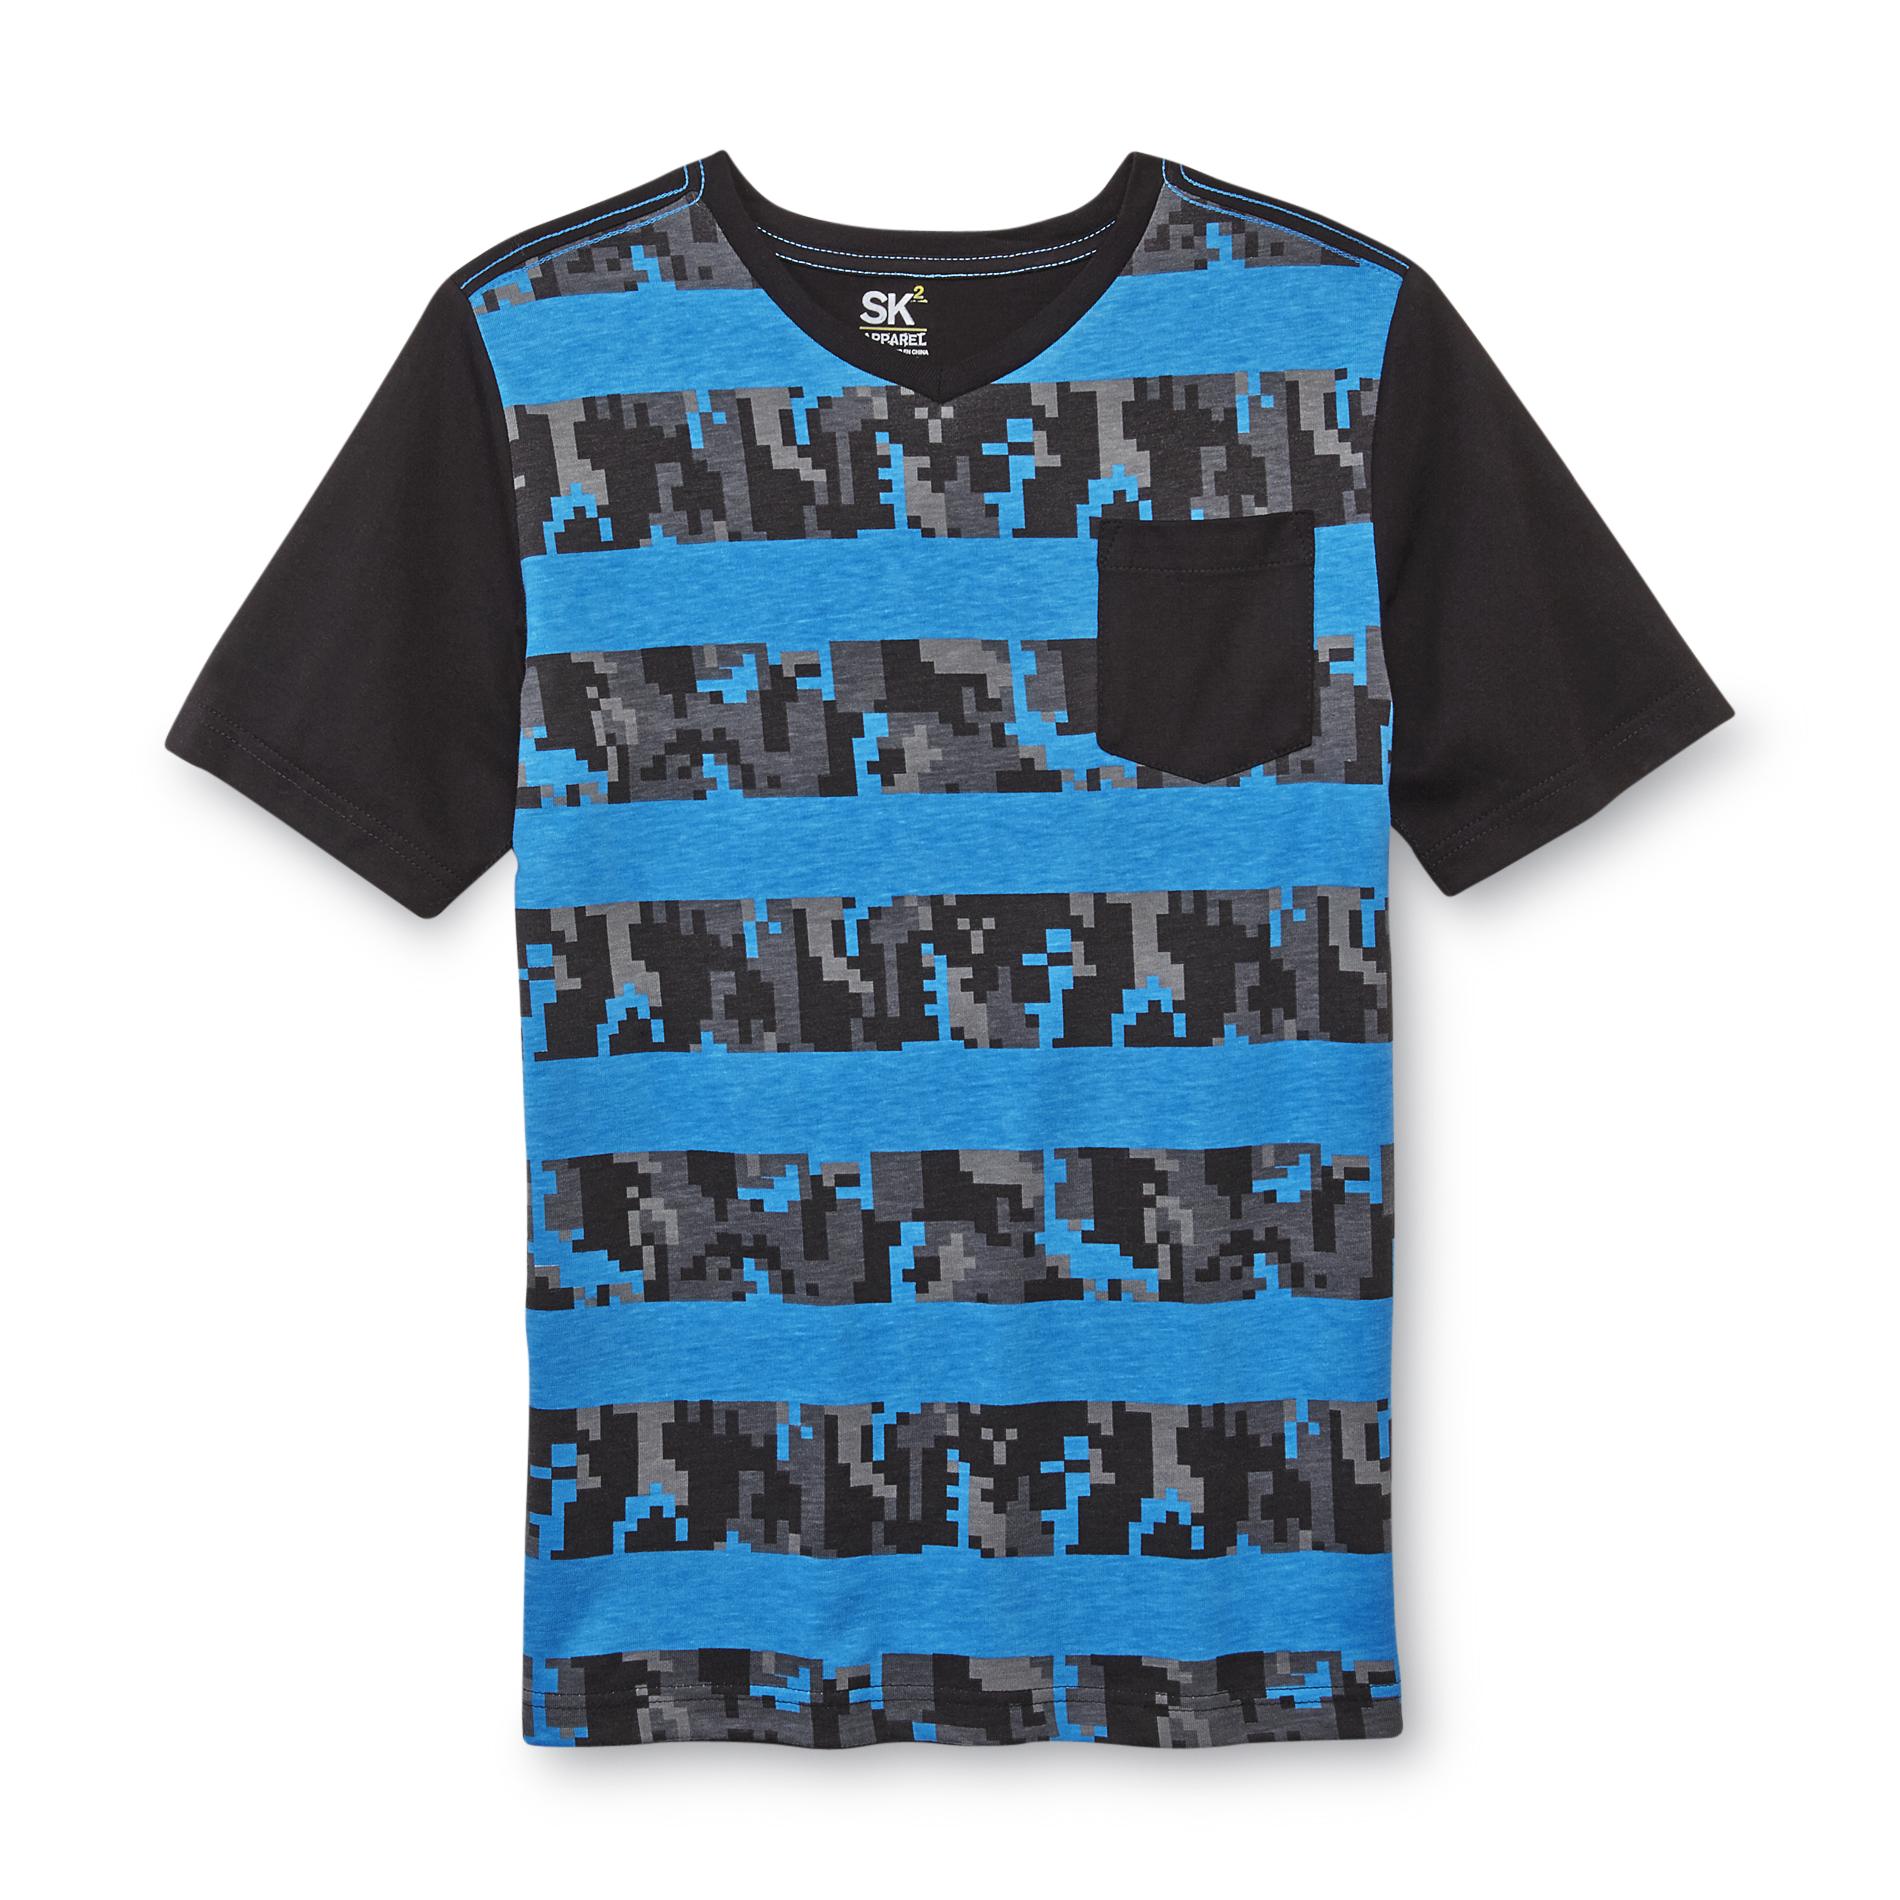 SK2 Boy's Graphic T-Shirt - Striped